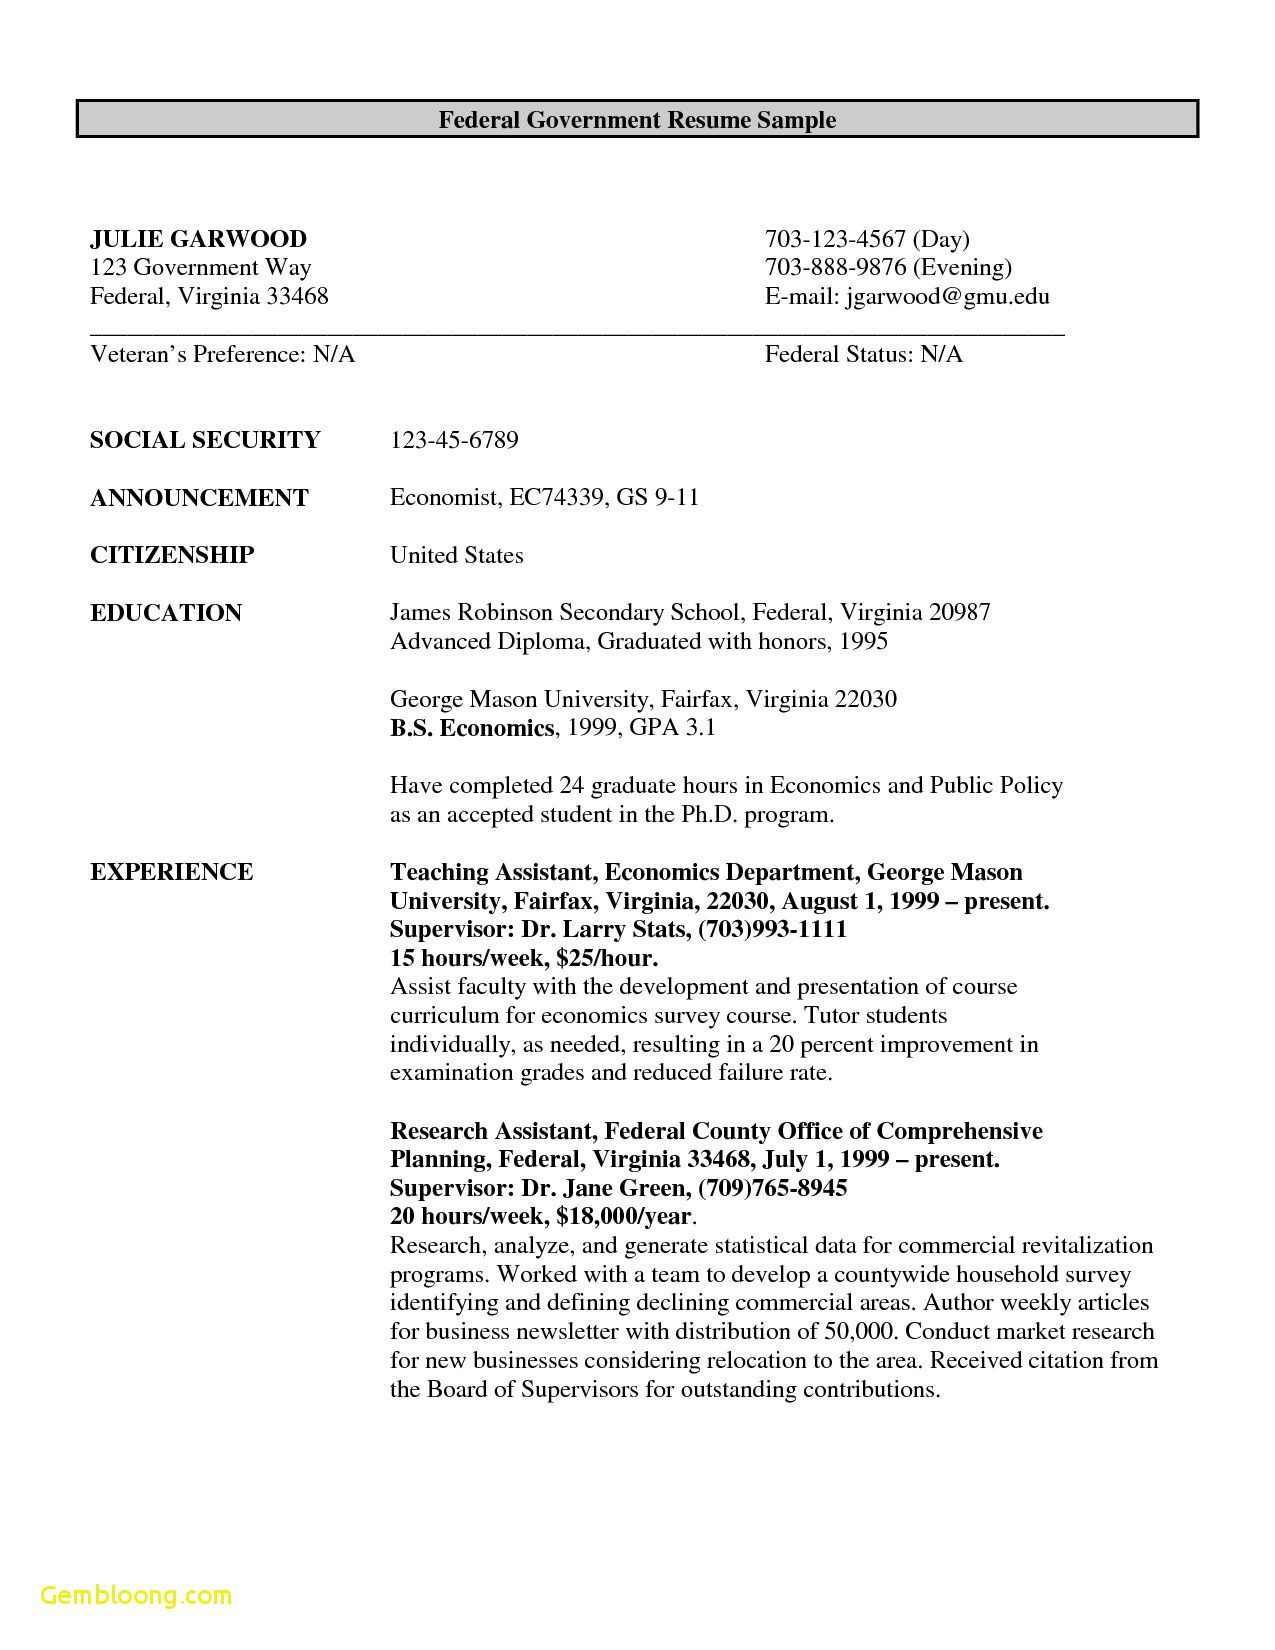 fre resume templates for government jobsml